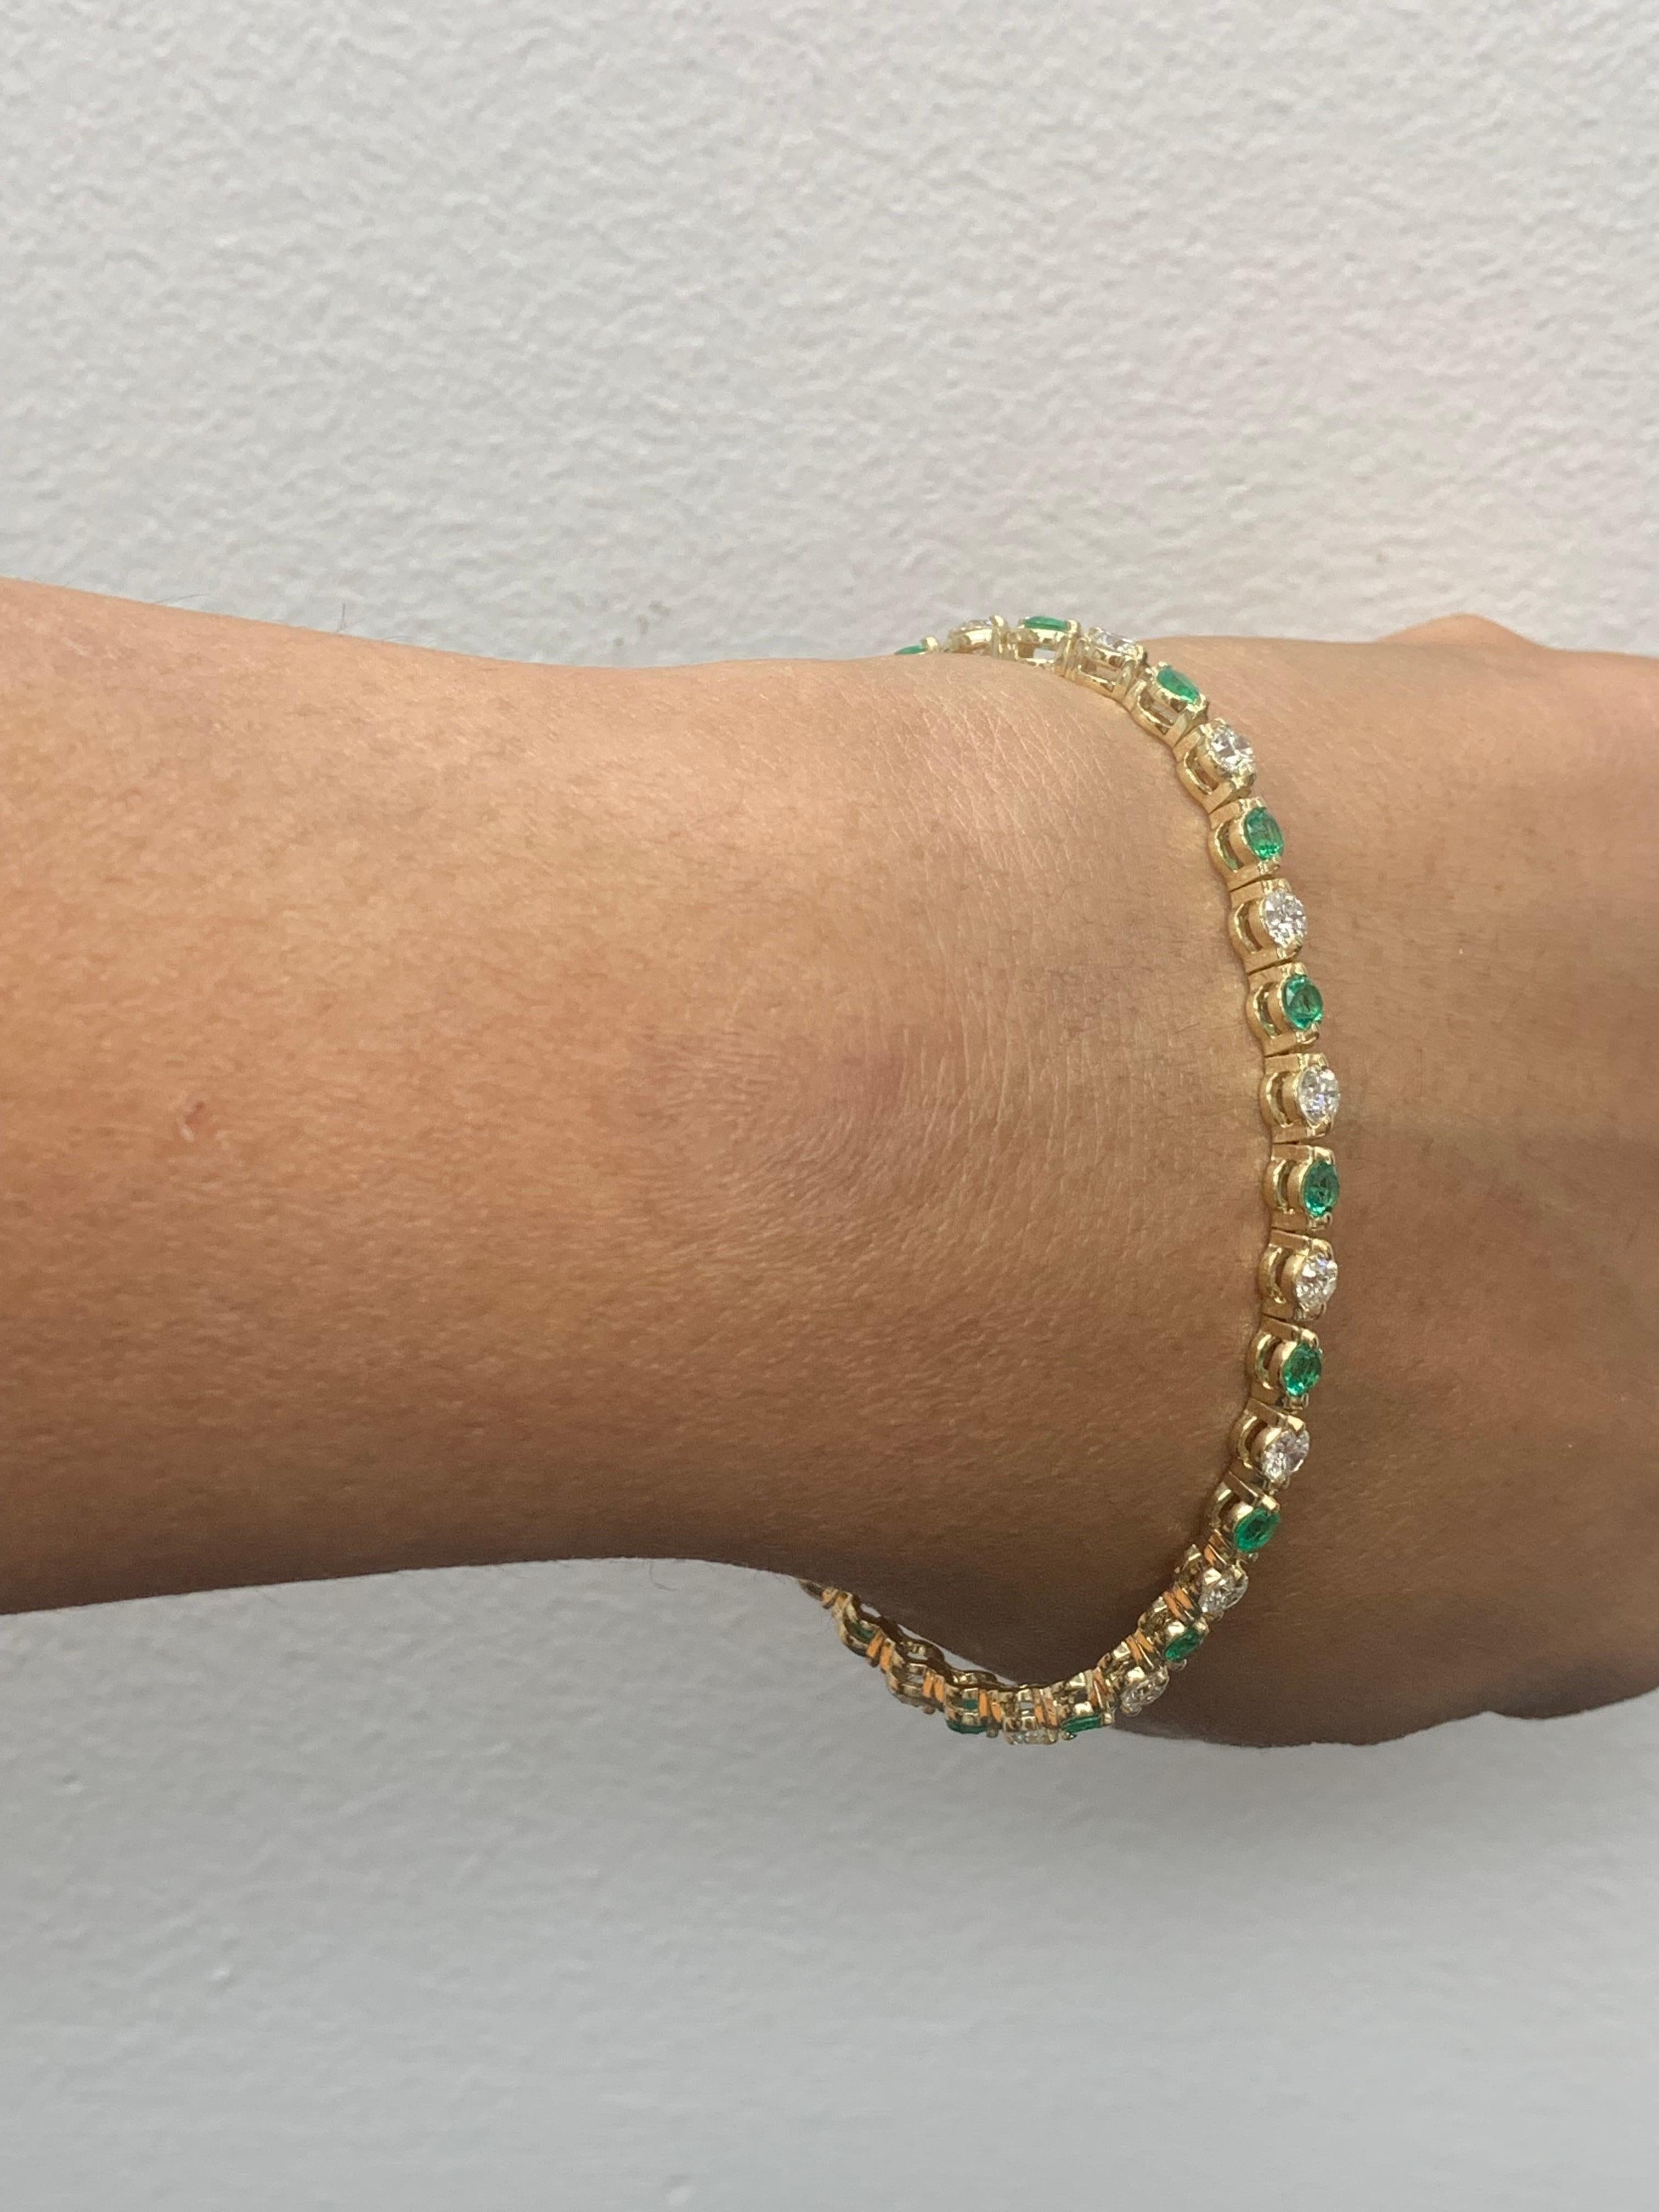 2.05 Carat Round Emerald and Diamond Bracelet in 14K Yellow Gold For Sale 2